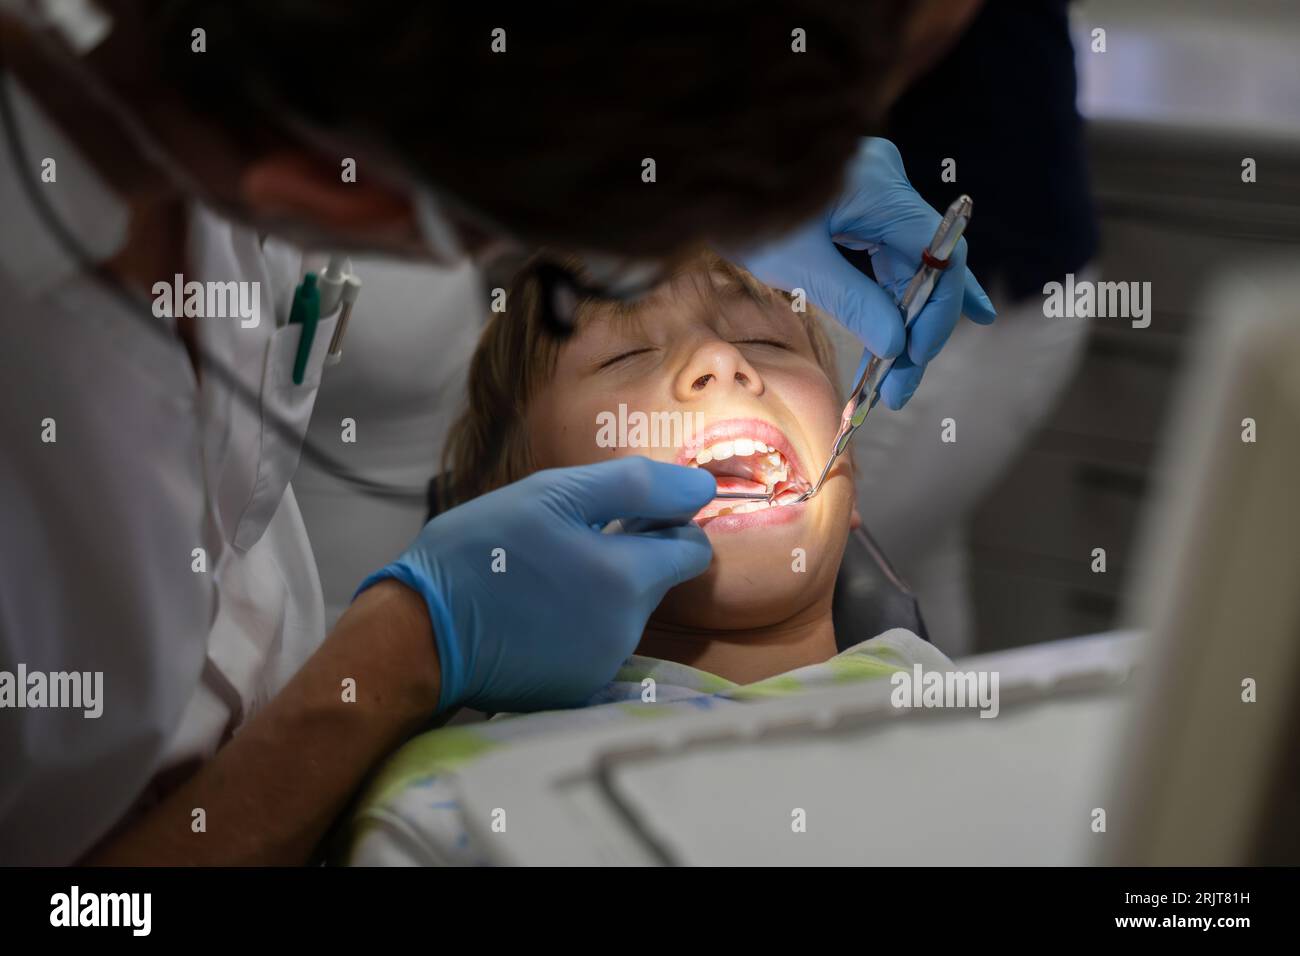 Dentist examining patient's teeth with tools at clinic Stock Photo